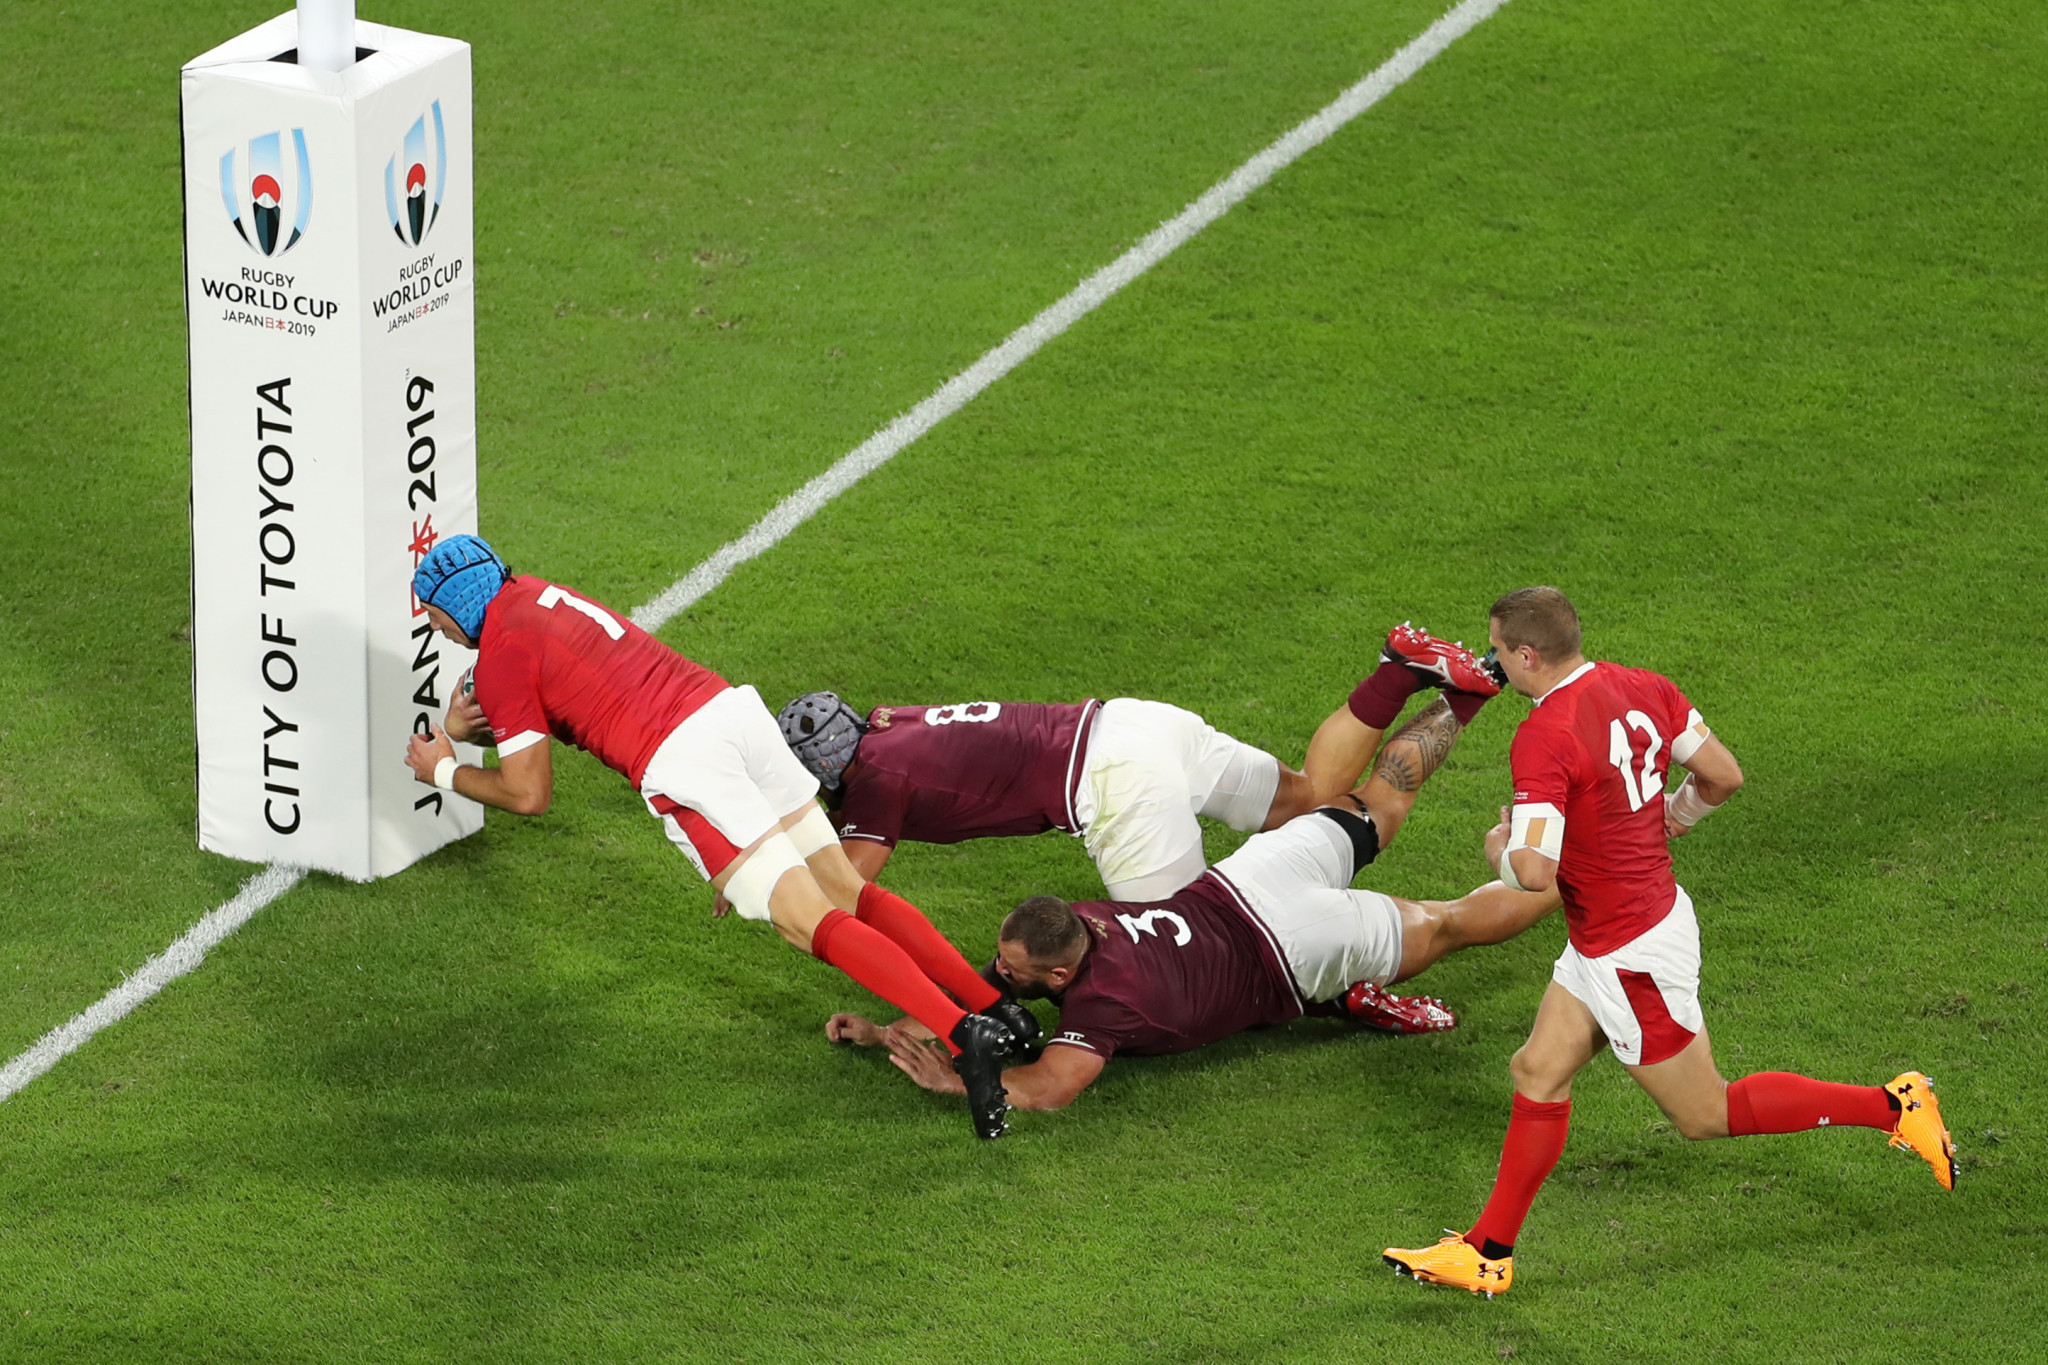 Justin Tipuric scored the second Welsh try as Georgia were swept away ©Getty Images